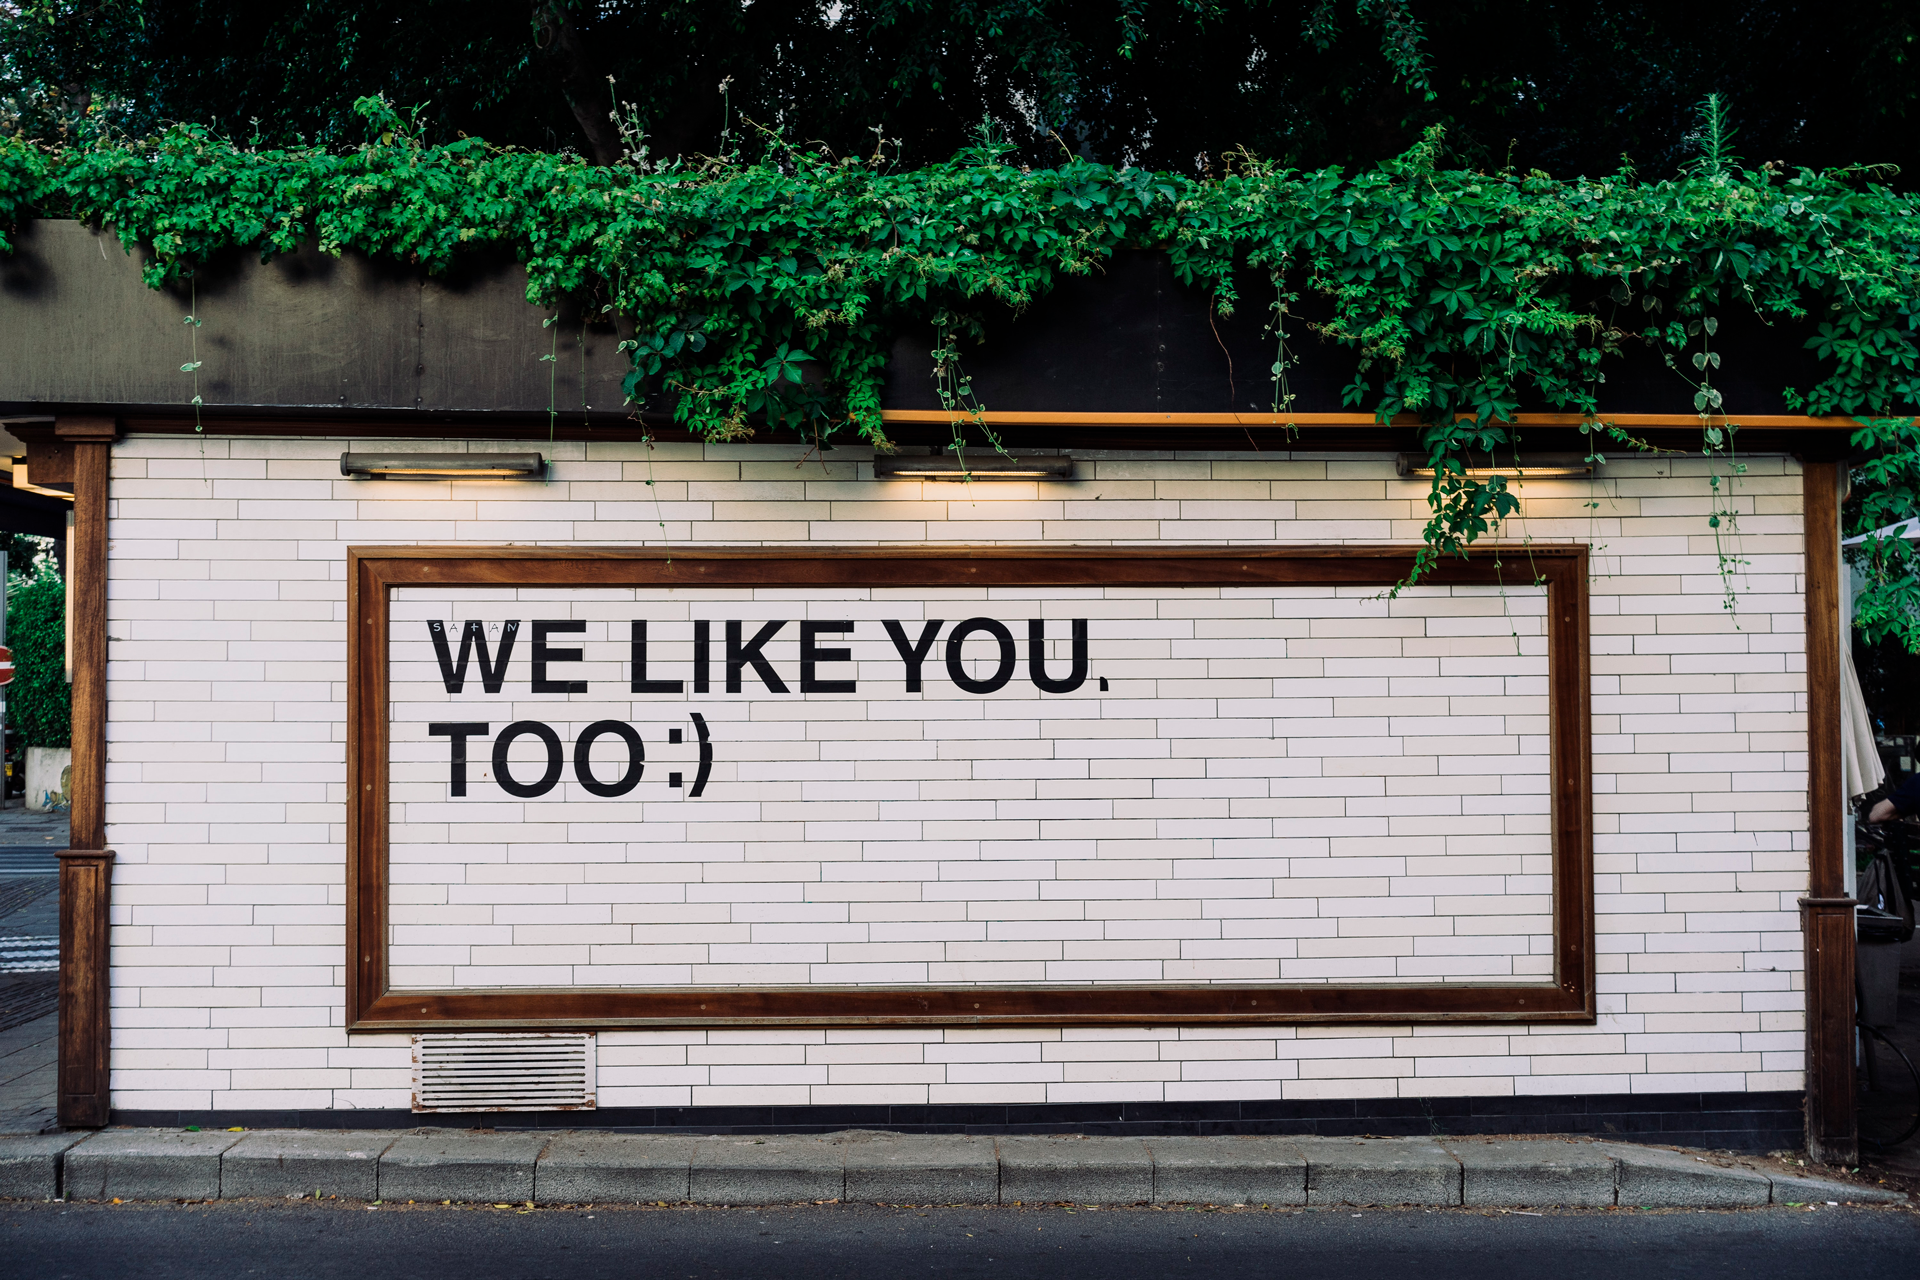 A sign that shows "We like you too" text.